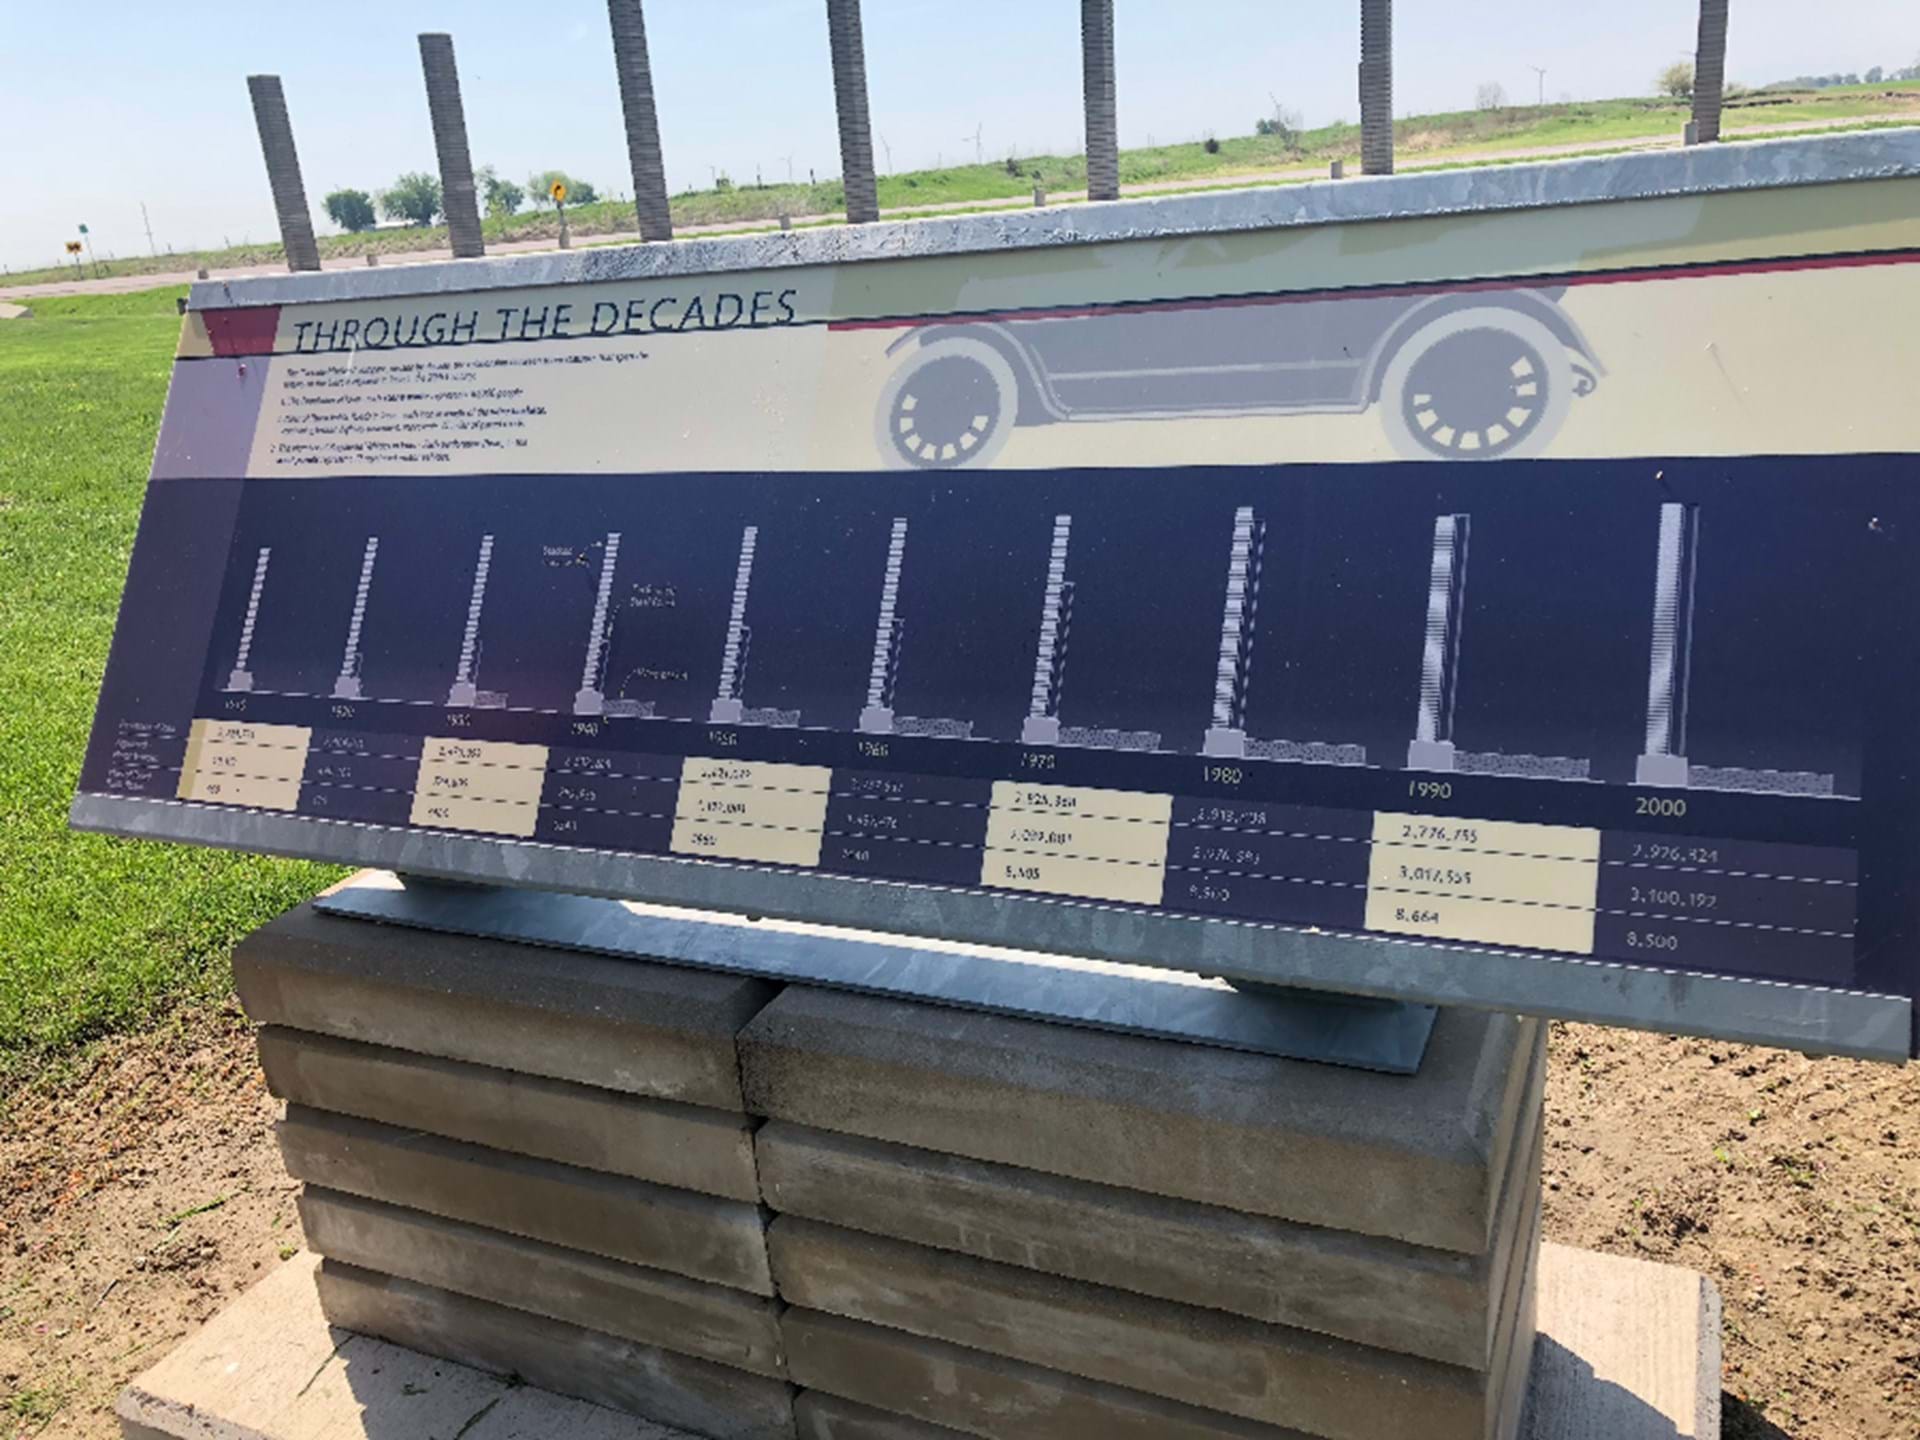 One of many interpretive panels with Lincoln Highway history and information